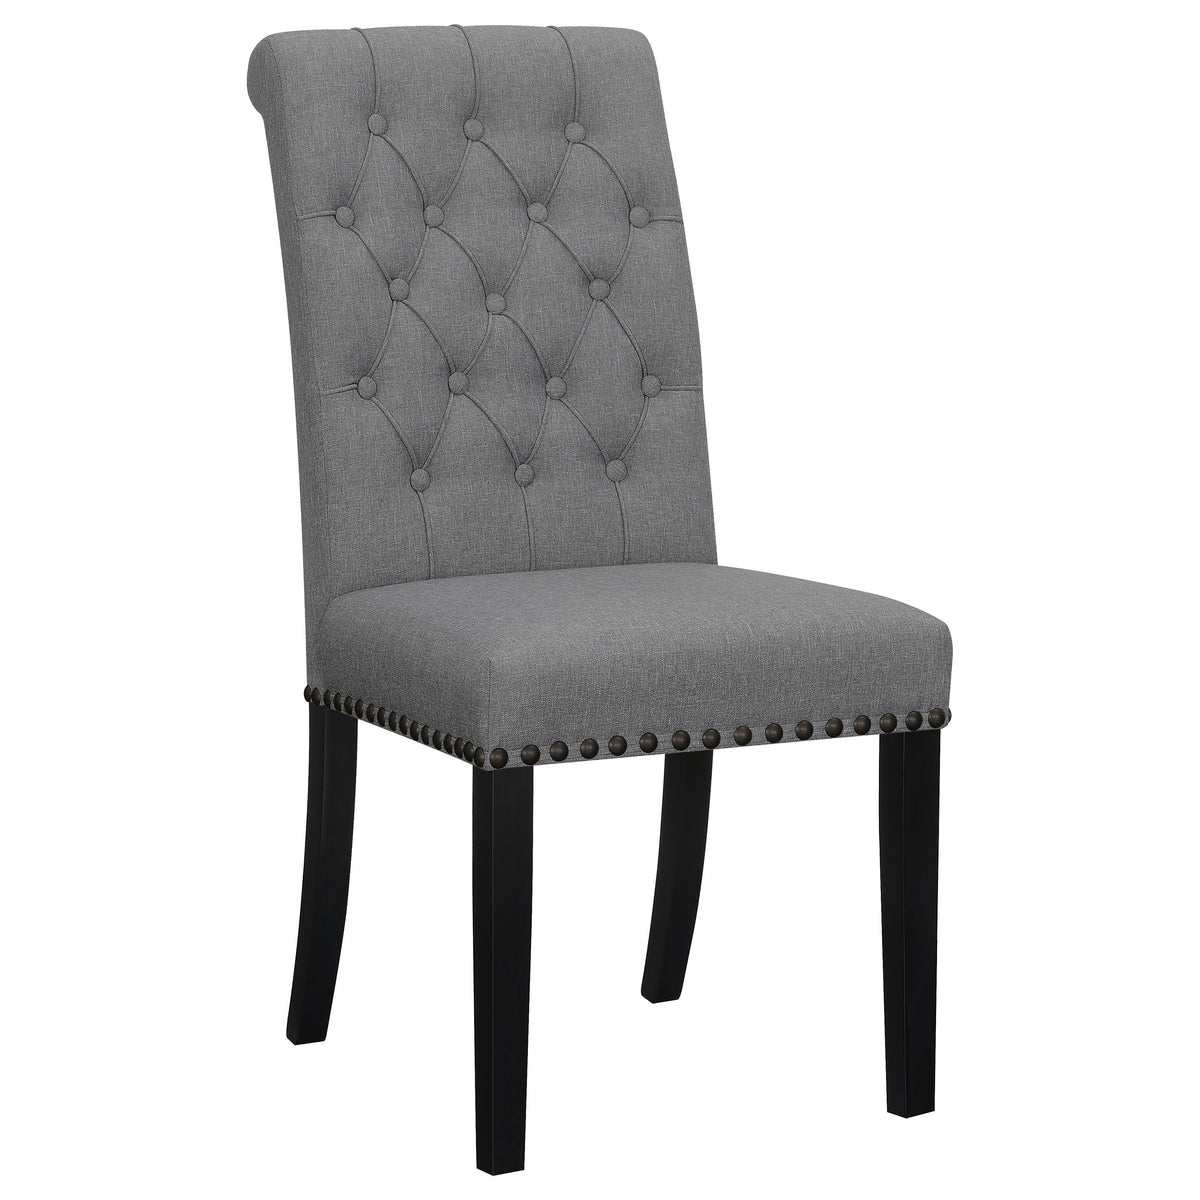 Alana Upholstered Tufted Side Chairs with Nailhead Trim (Set of 2)  Half Price Furniture